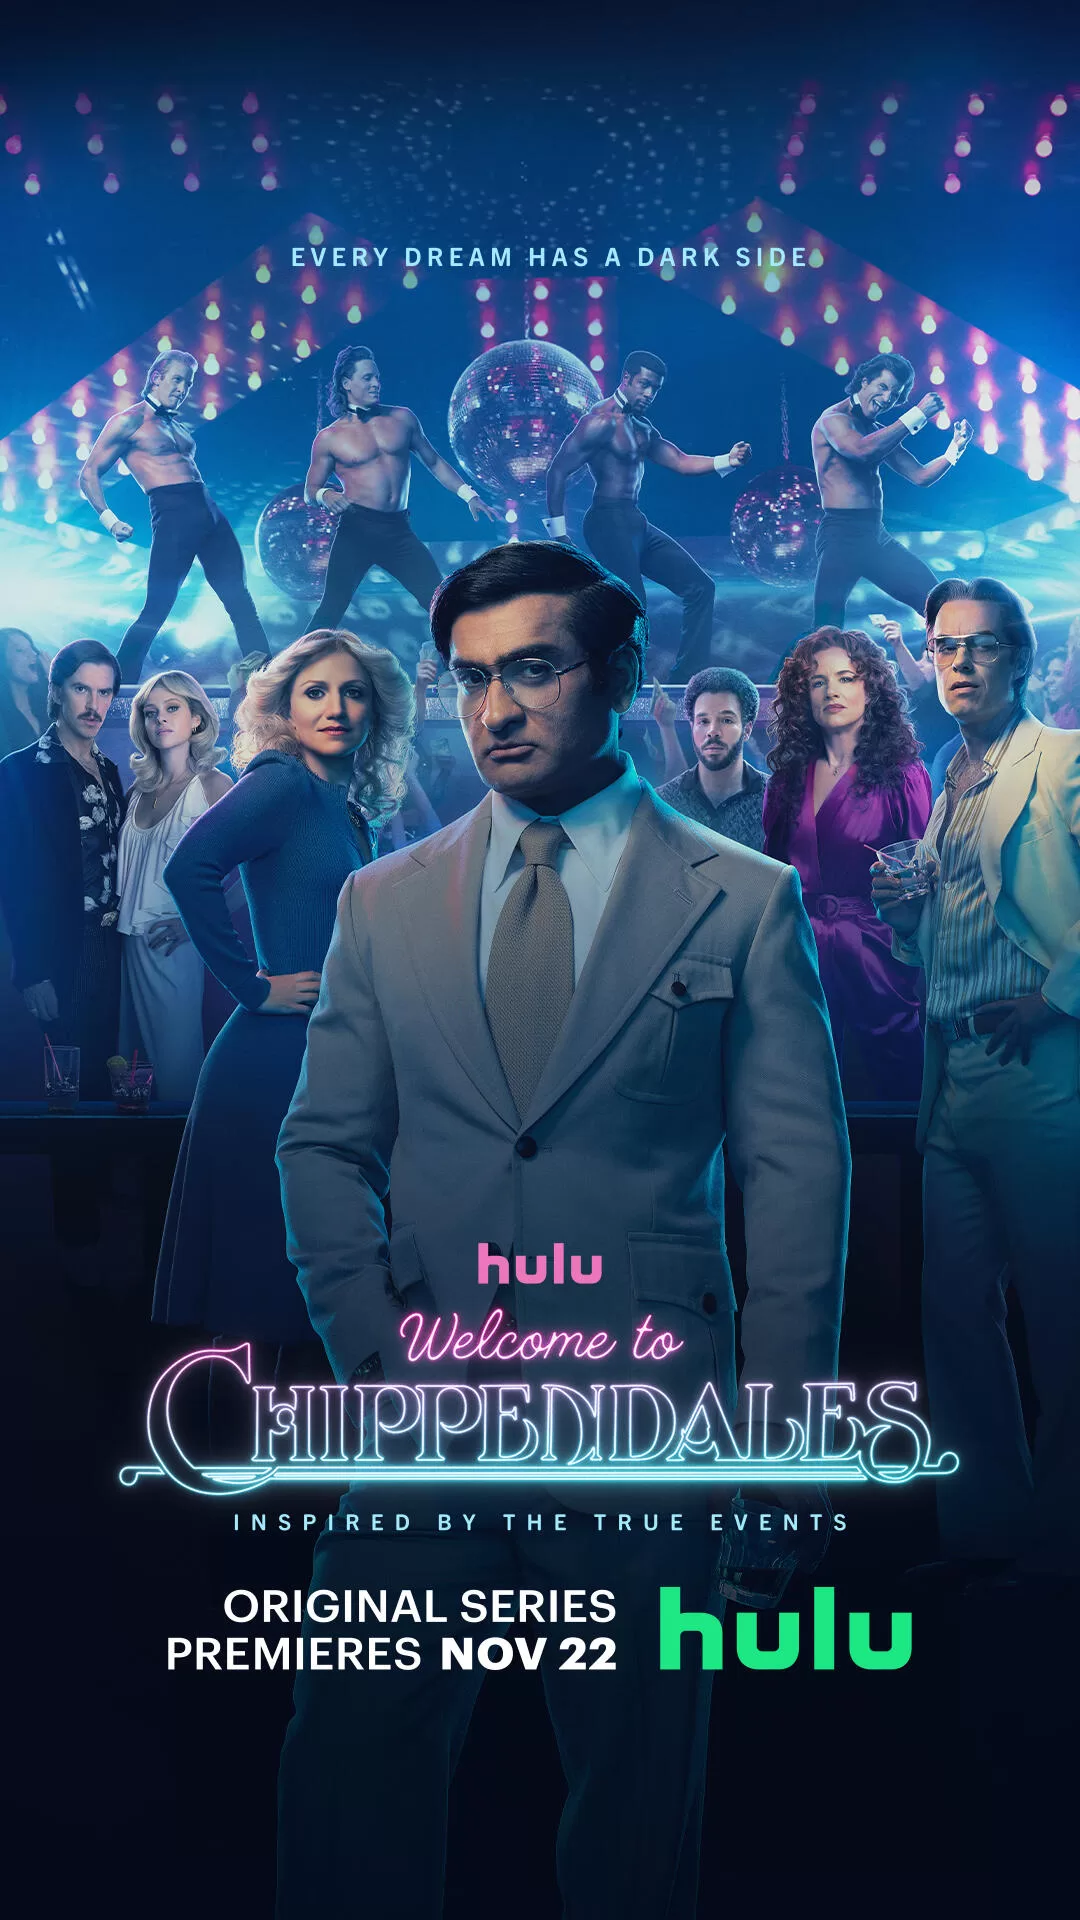 the trailer poster for Welcome To Chippendales. The Logo and the Hulu sign sits at the bottom, while overhead a series of topless men dance next to a logo above their heads that says: Every Dream Has a Darkside. In the middle of all of this, is the cast, with Kumail Nanjiani at center.